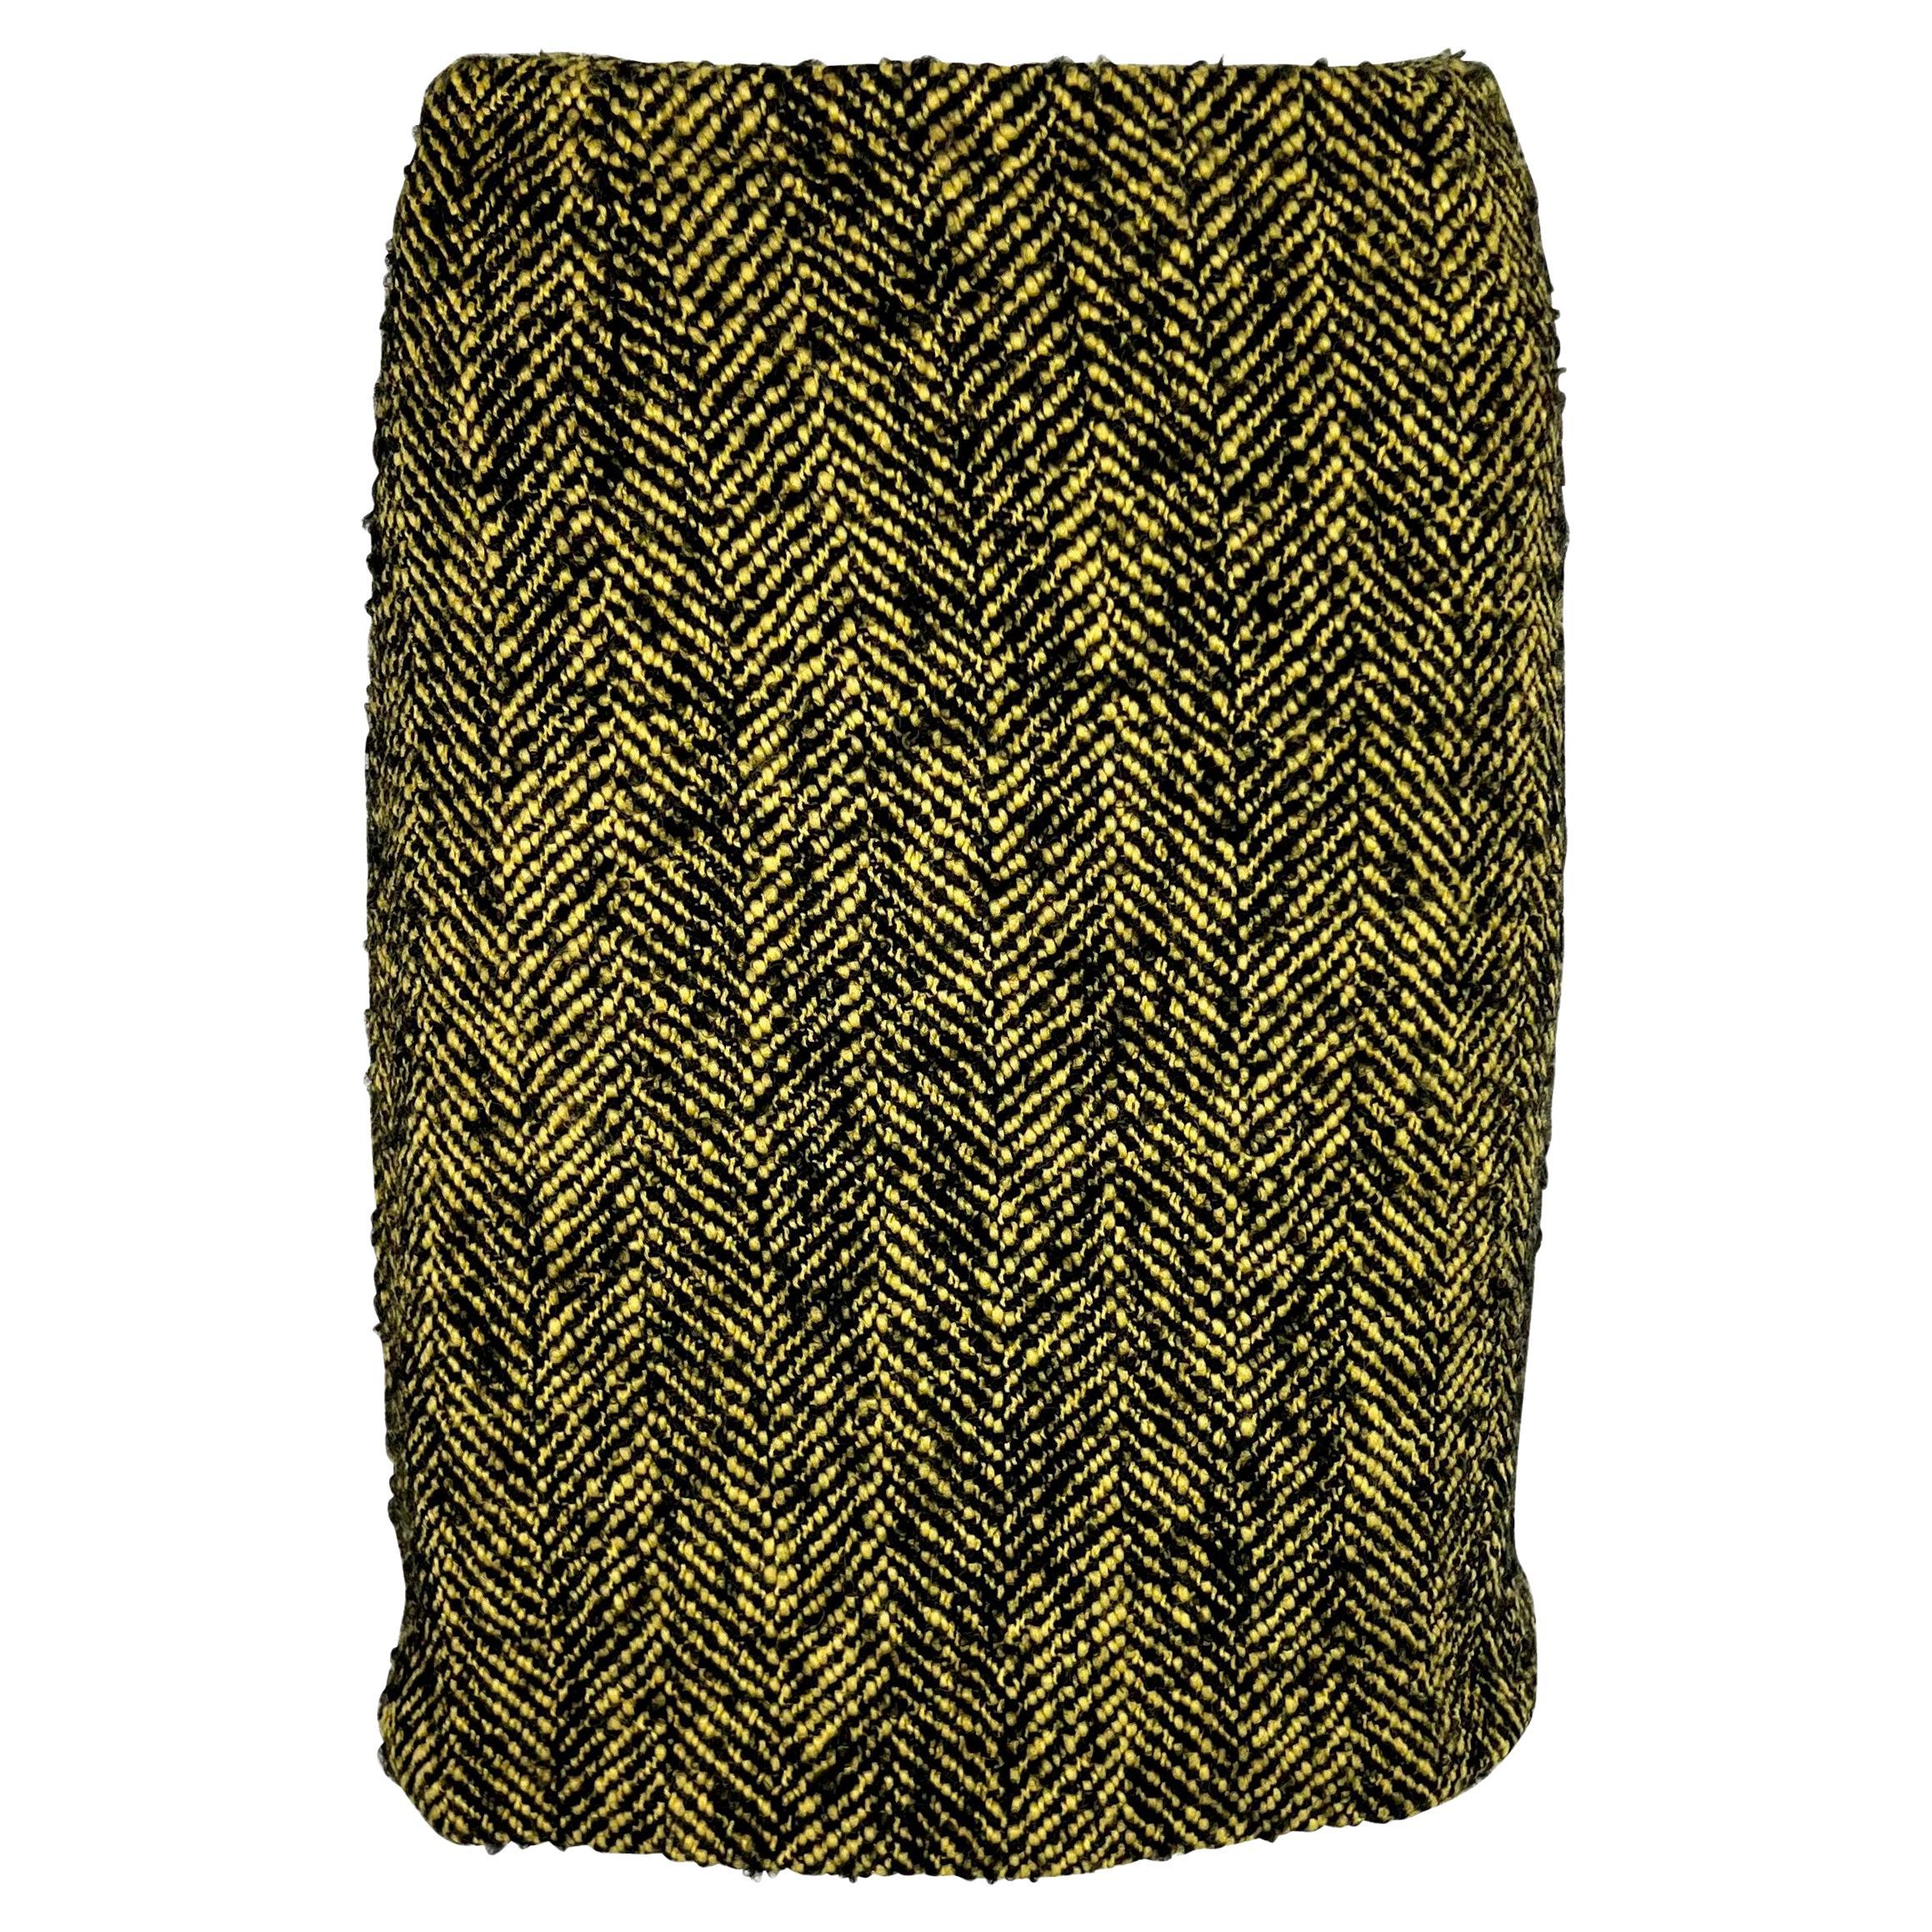 1990s Gianni Versace Couture Black Yellow Chevron Tweed Skirt For Sale